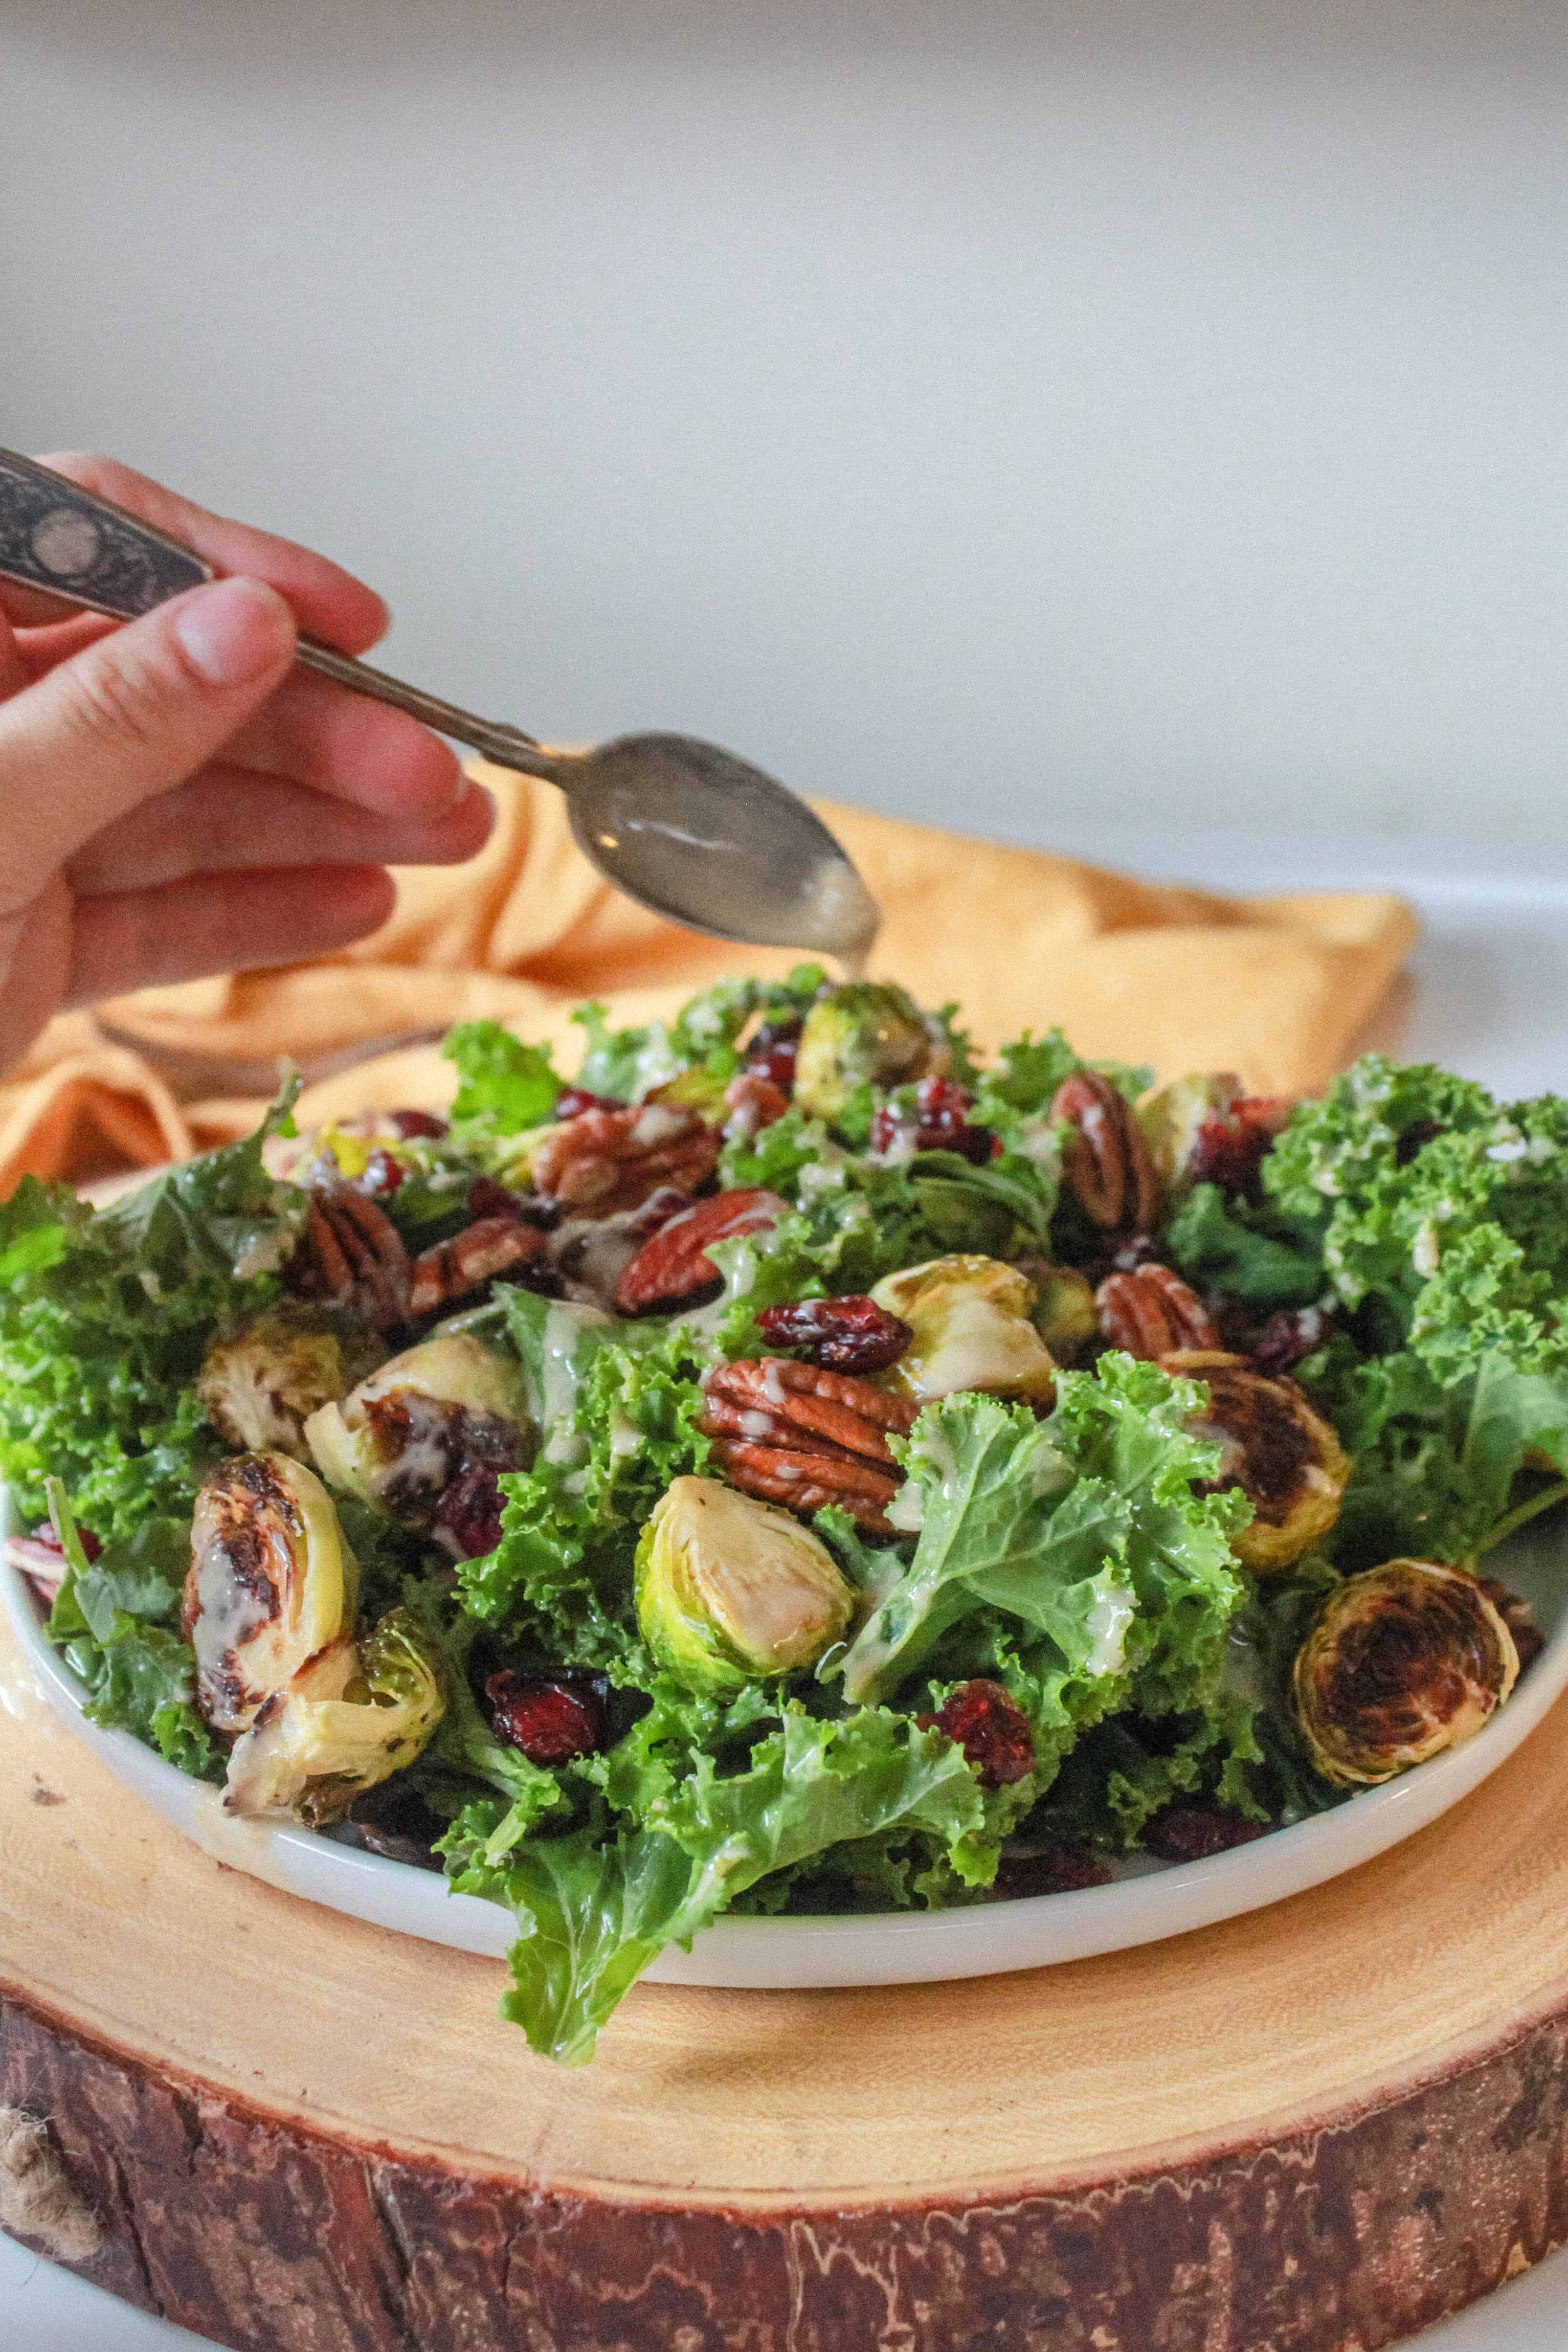 Kale Salad with Brussel Sprouts, Cranberries, and Pecans